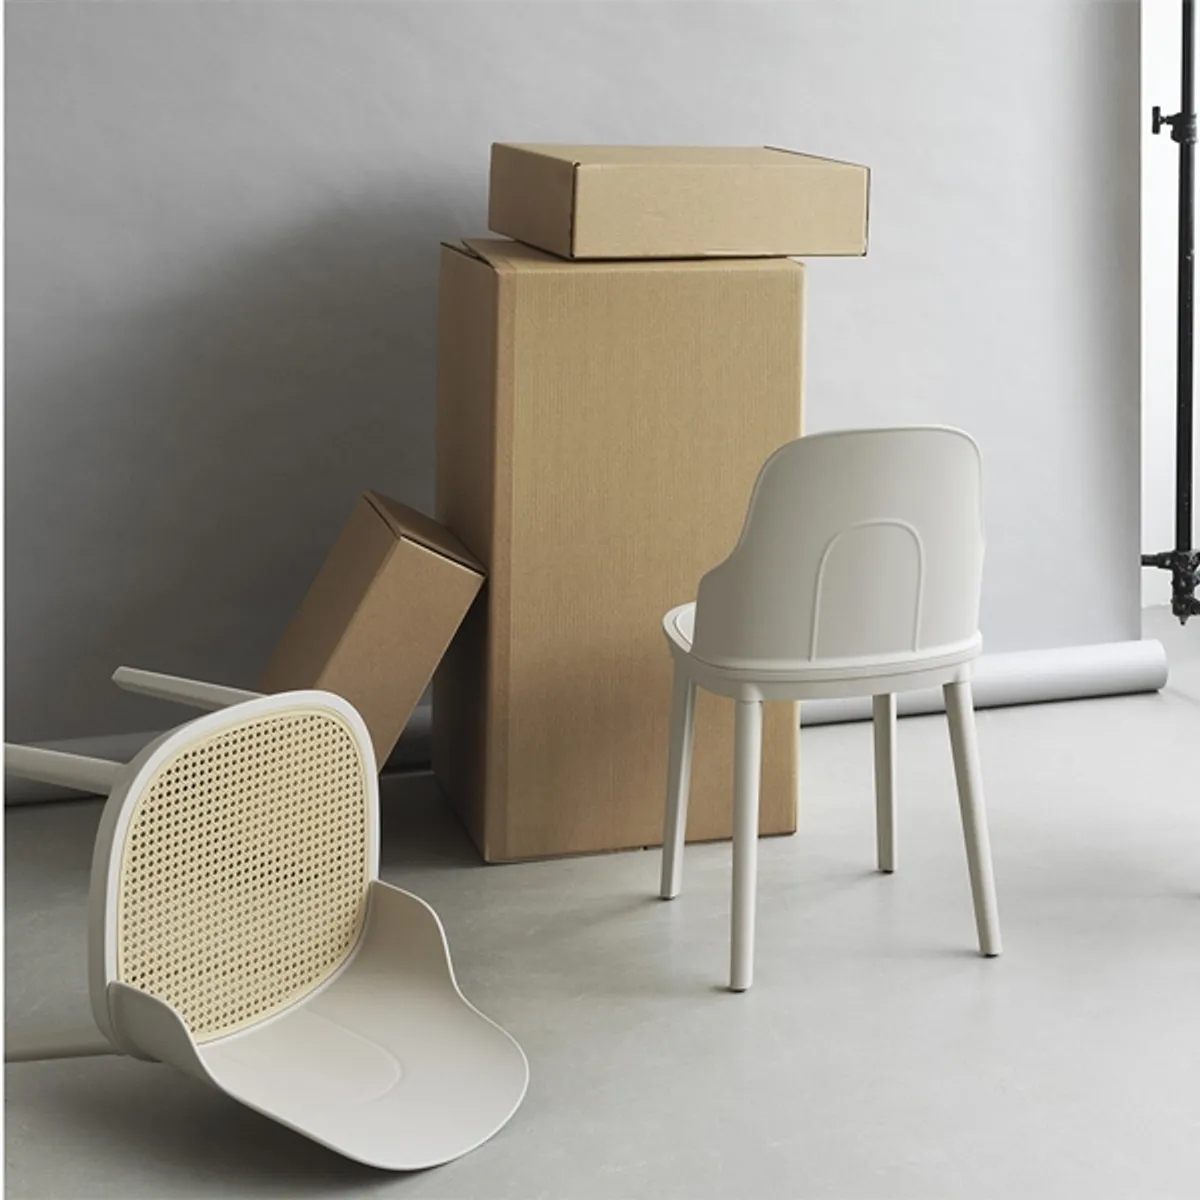 Bon wicker poly chair Inside Out Contracts7